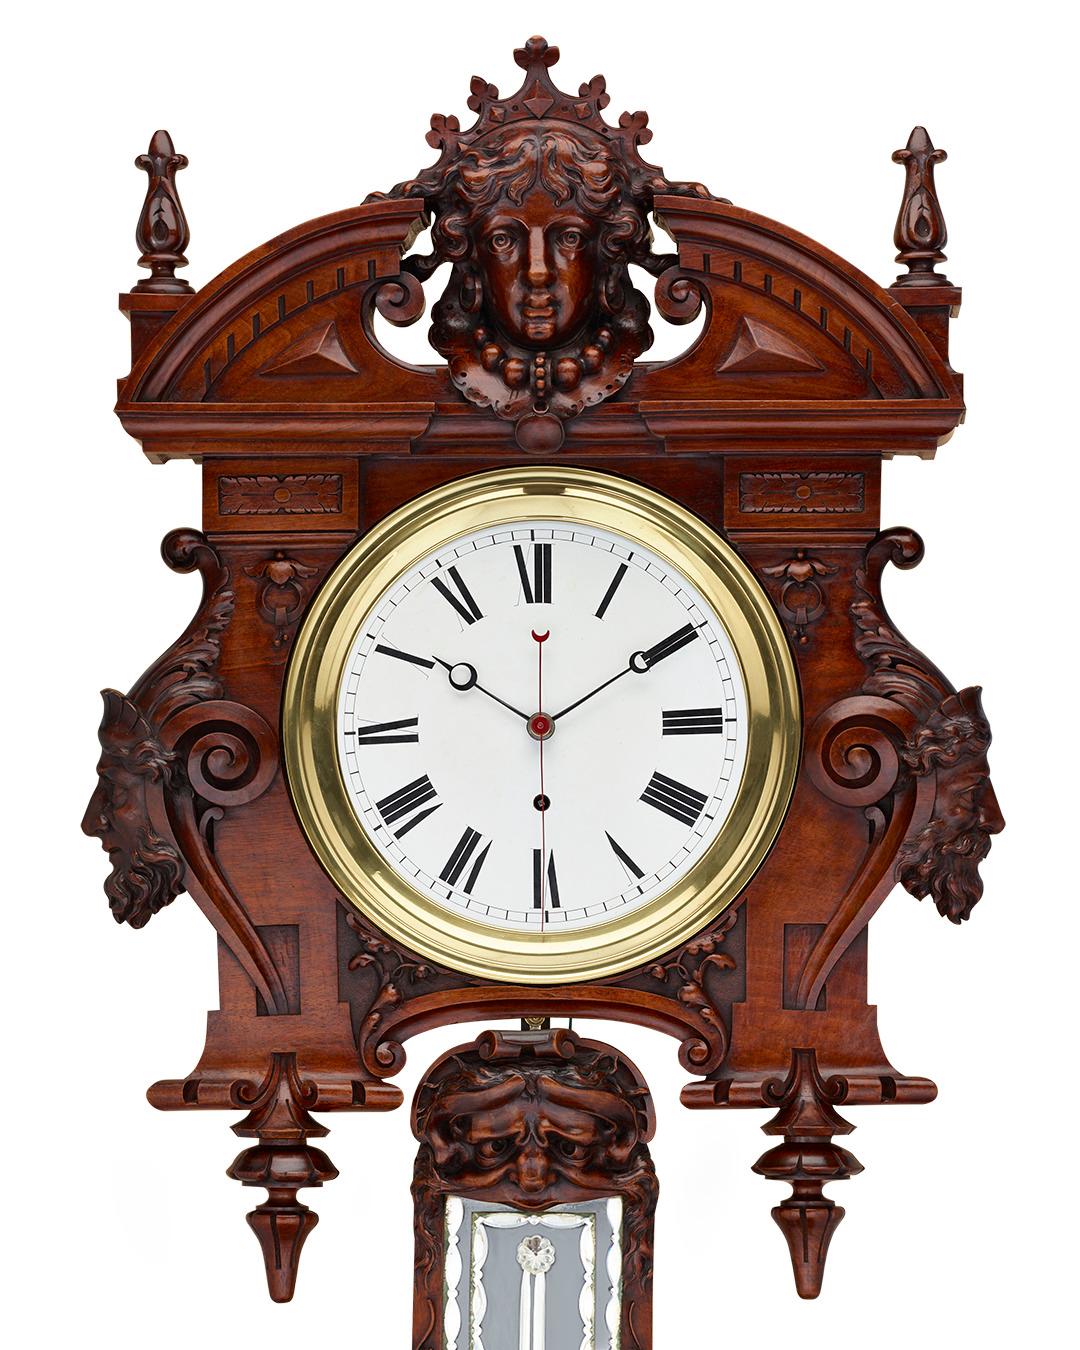 This exceptionally rare German pinwheel regulator clock is almost certainly the only one of its kind in existence. The highly unique timepiece features an extraordinary pendulum that is carved almost entirely from wood. 

Due to the nature of